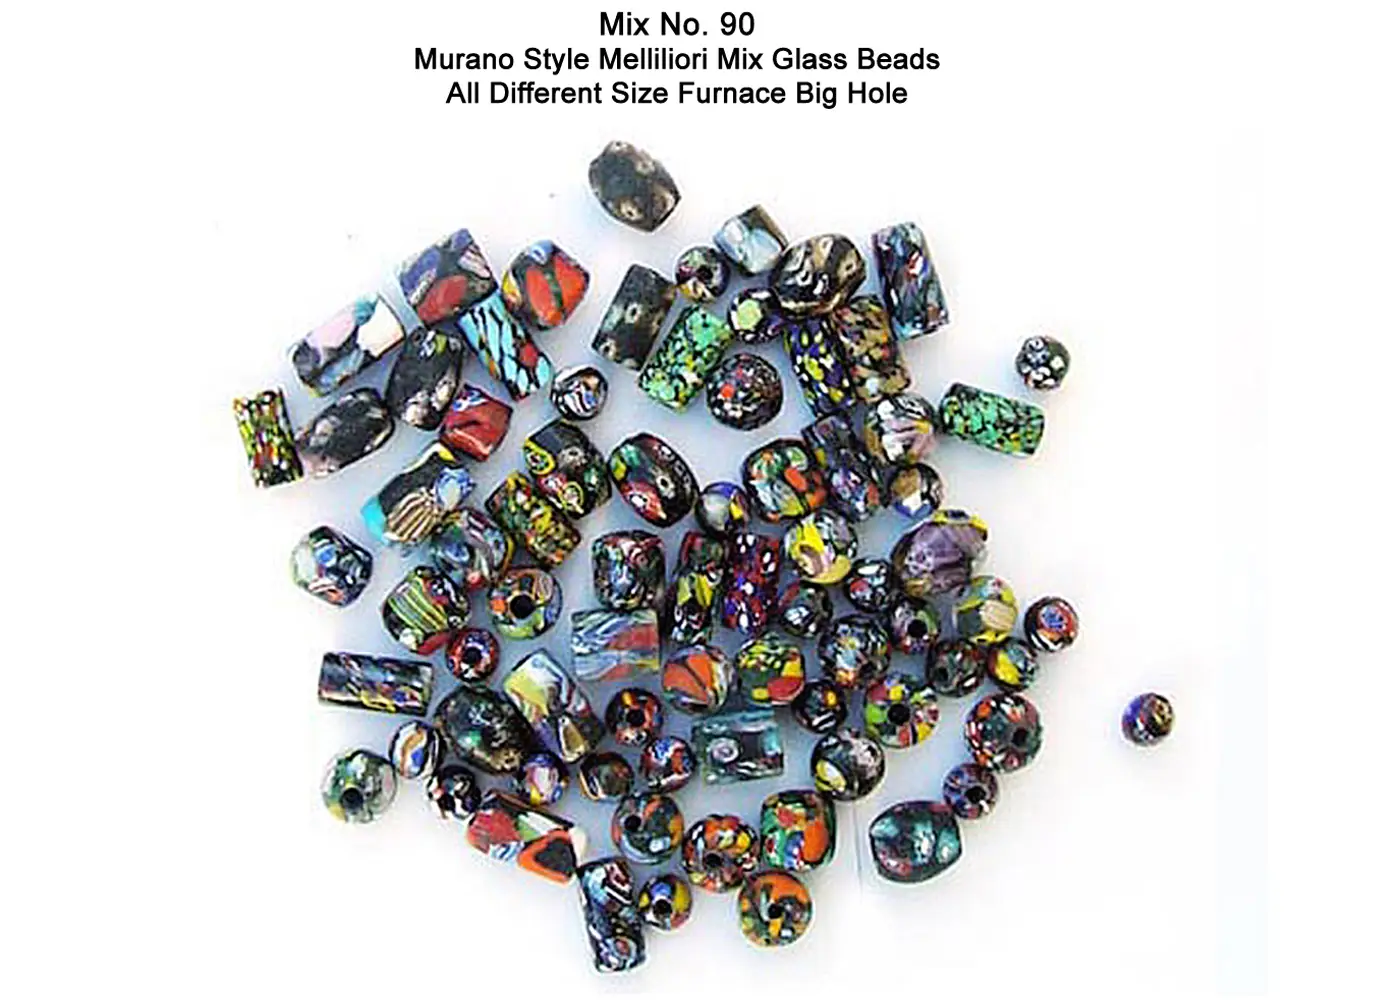 Murano Style Mellifiori Mix Glass Beads all different sizes furnace big hole